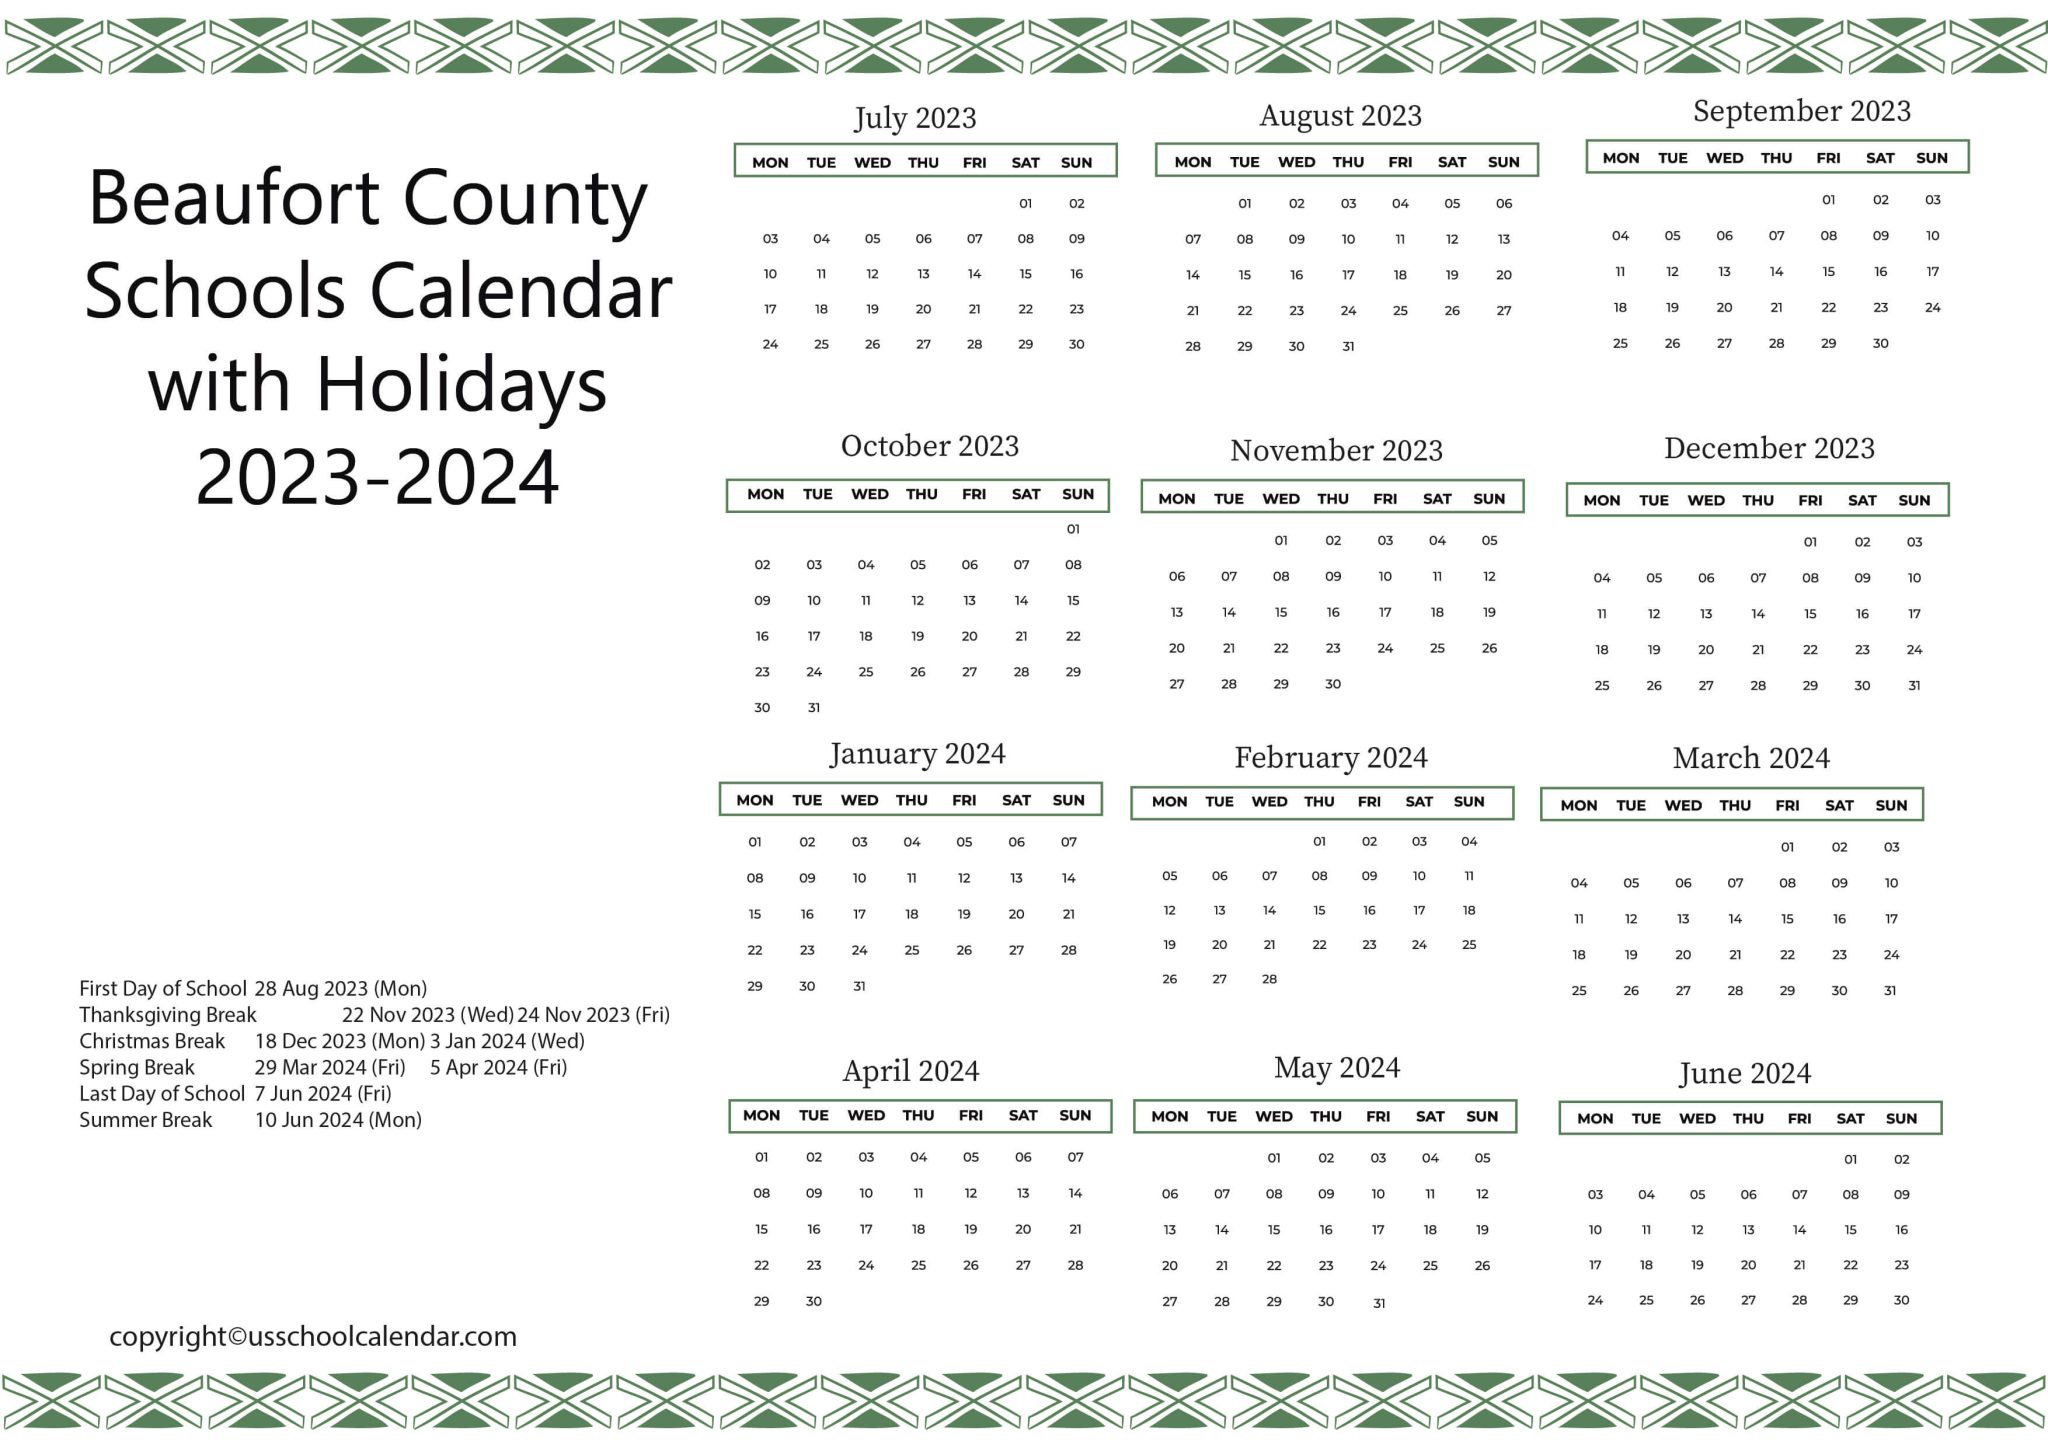 Beaufort County Schools Calendar with Holidays 2023 2024